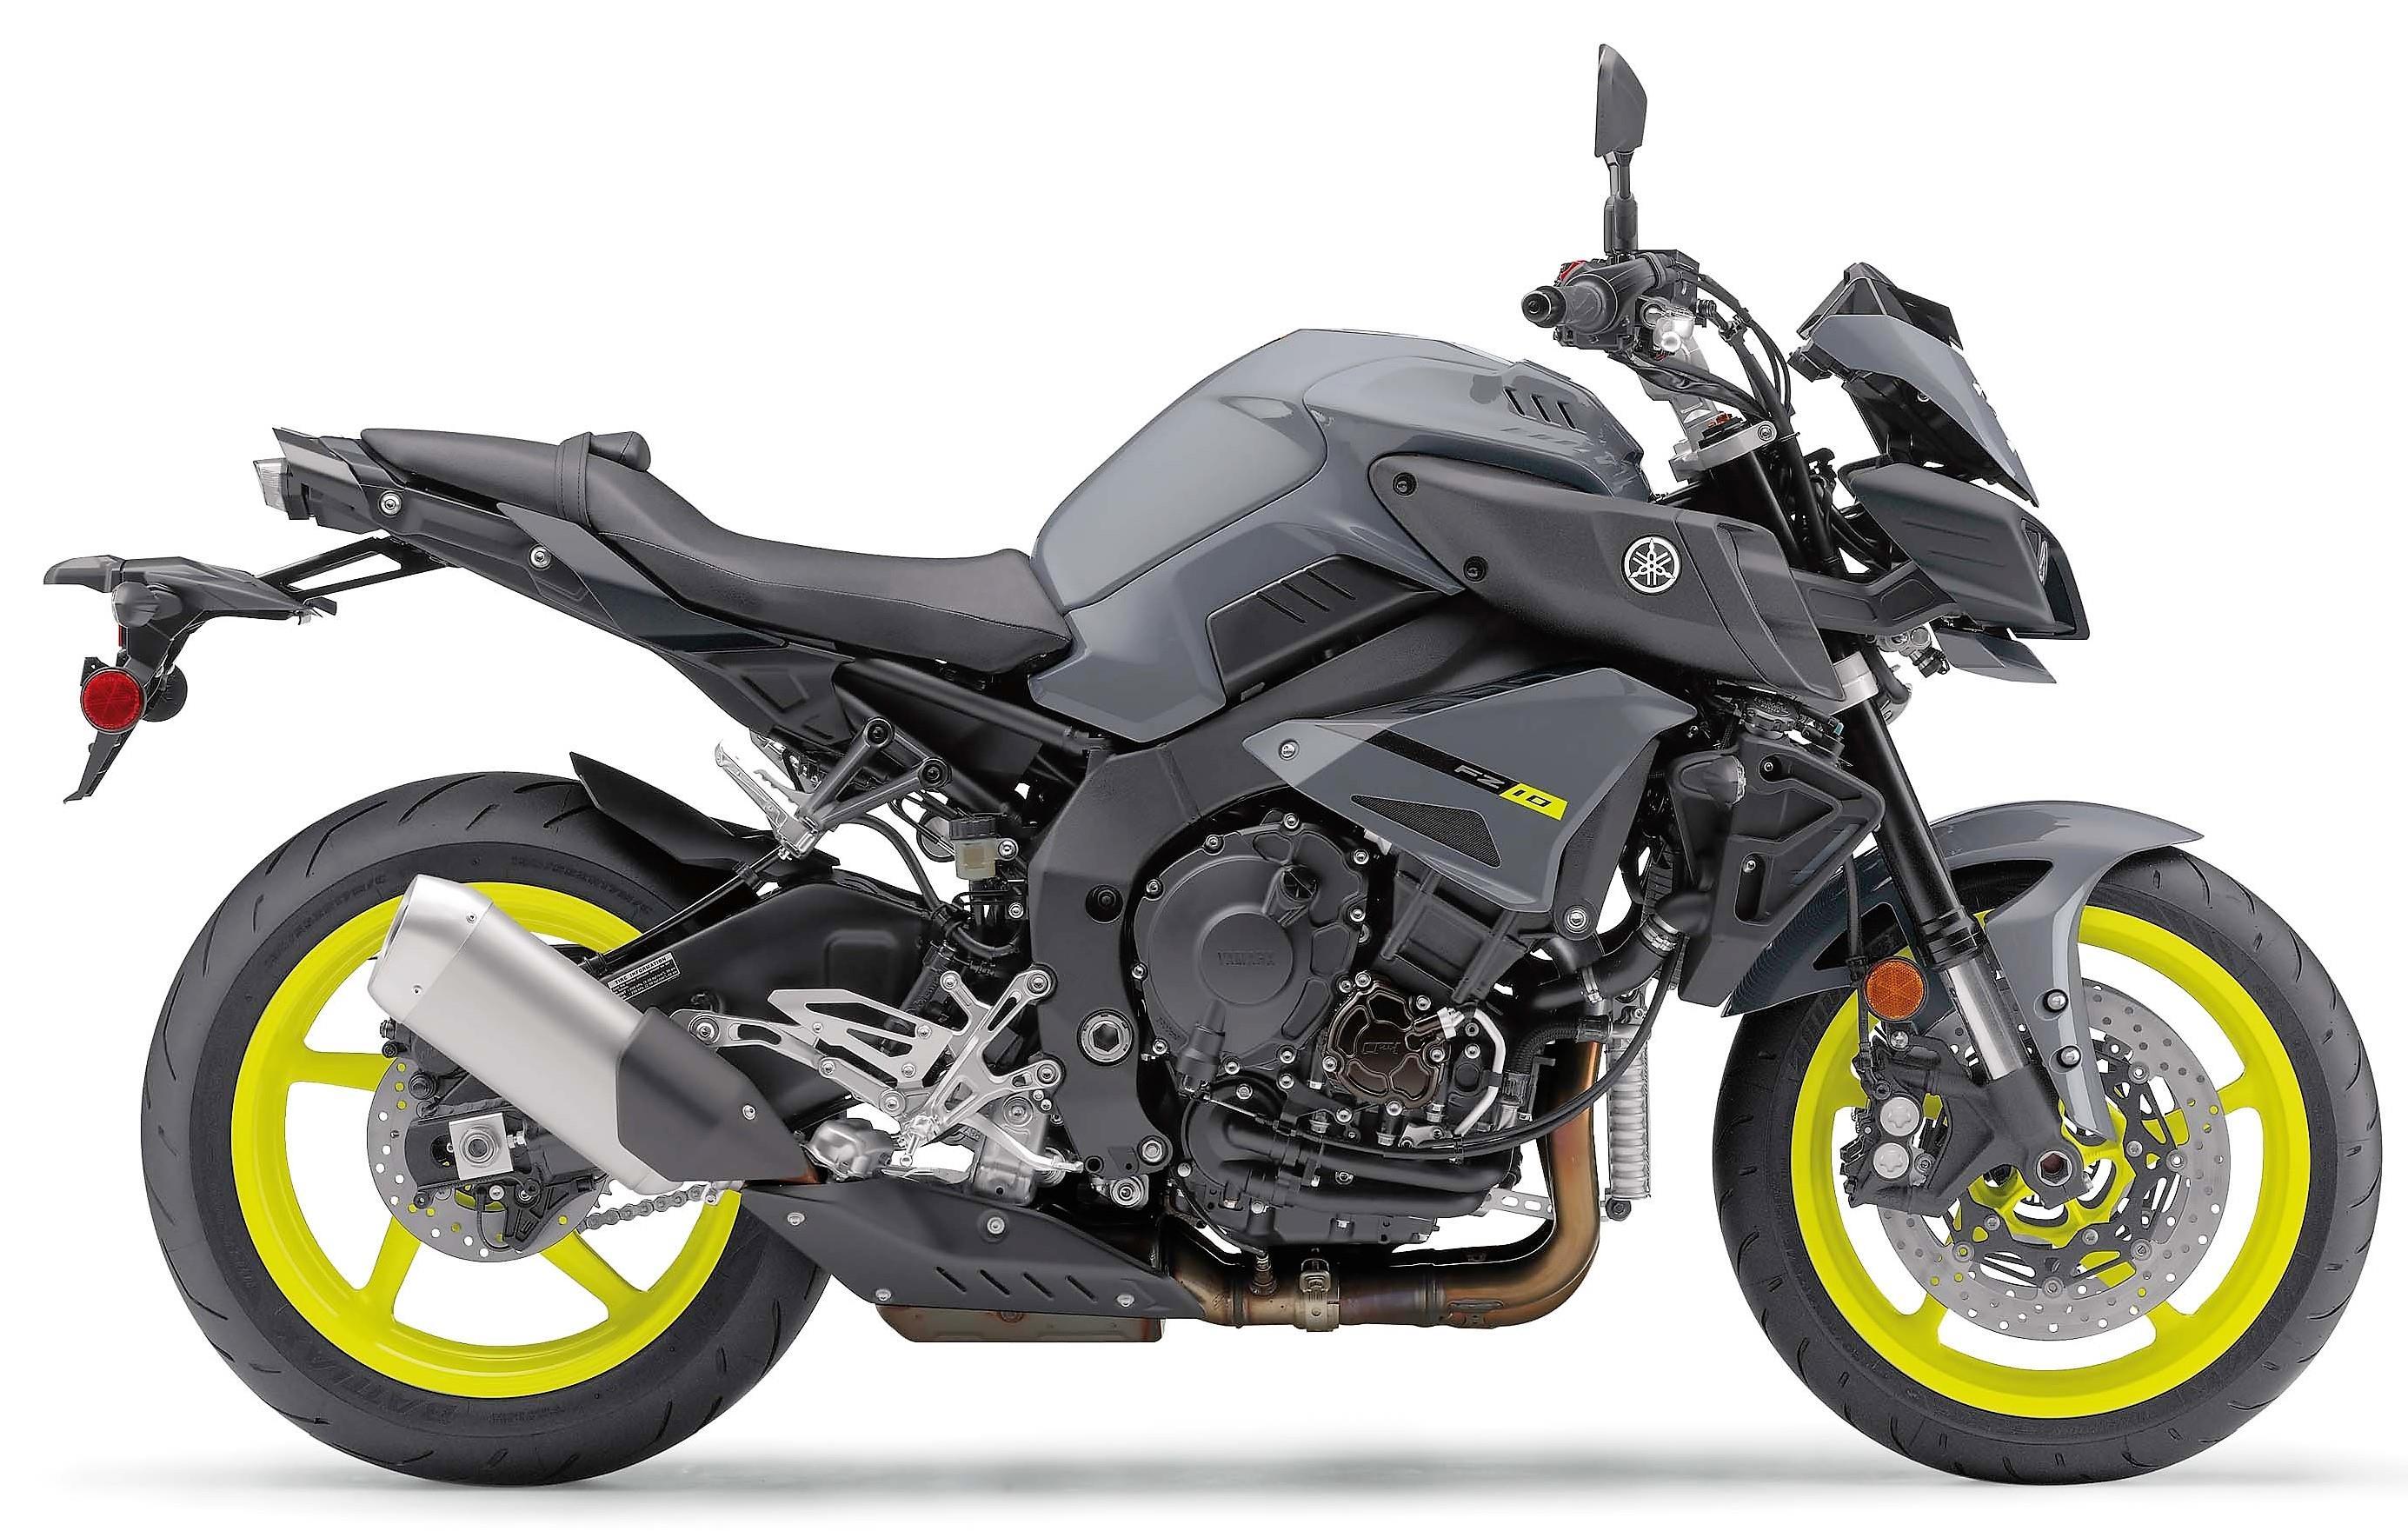 vandfald makker Kirsebær 2022 Yamaha FZ-10 Specifications and Expected Price in India